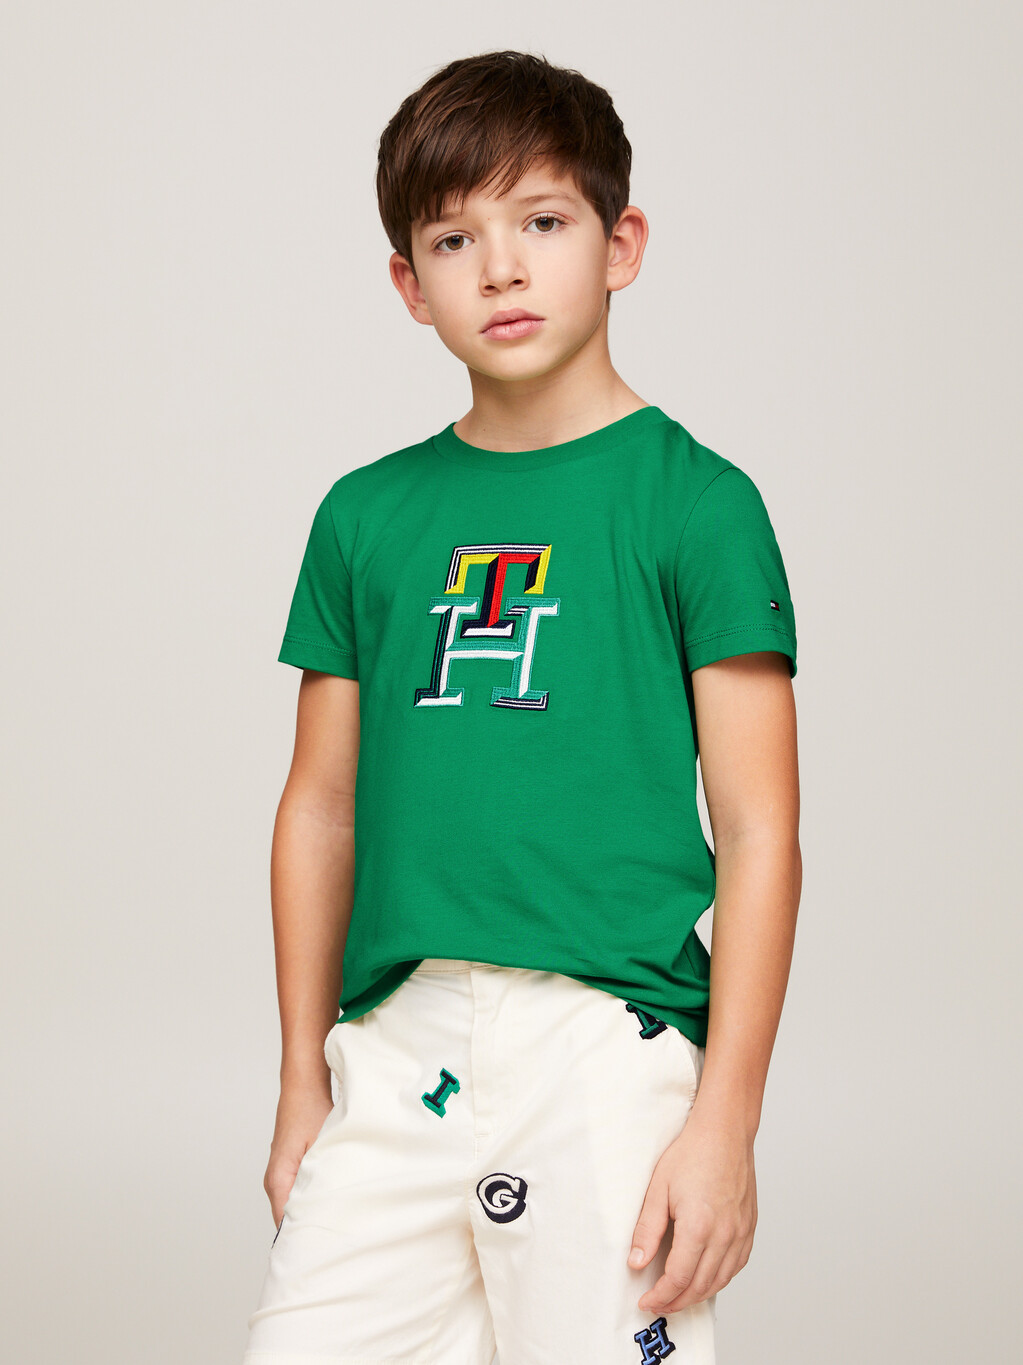 TH Monogram Multicolour Embroidery T-Shirt, Olympic Green, hi-res